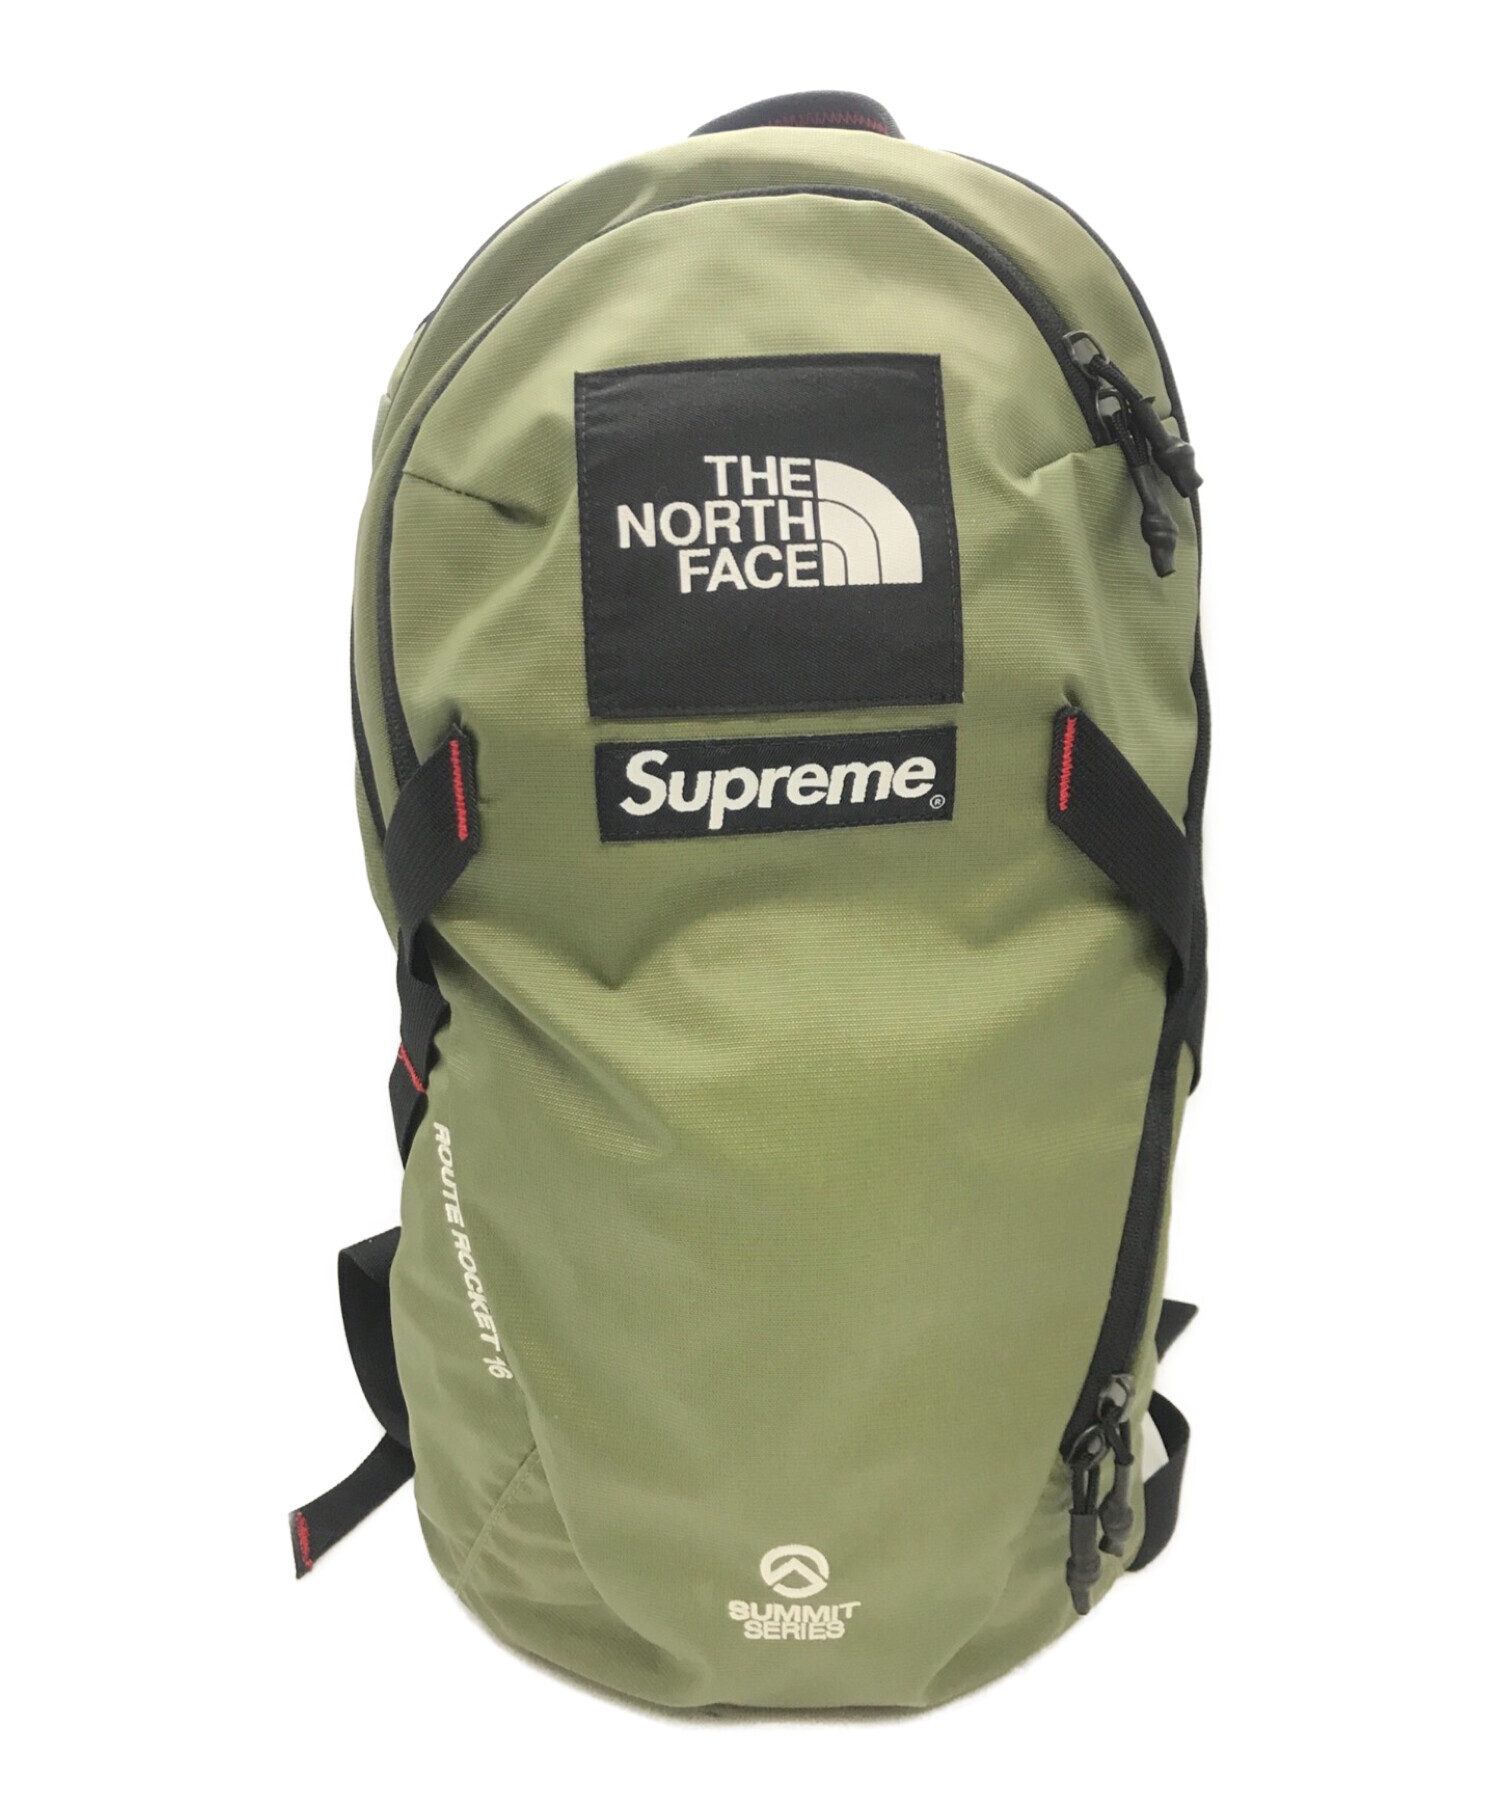 SUPREME×THE NORTH FACE (シュプリーム × ザノースフェイス) Outer Tape Seam Route Rocket  Backpack グリーン×ブラック サイズ:-